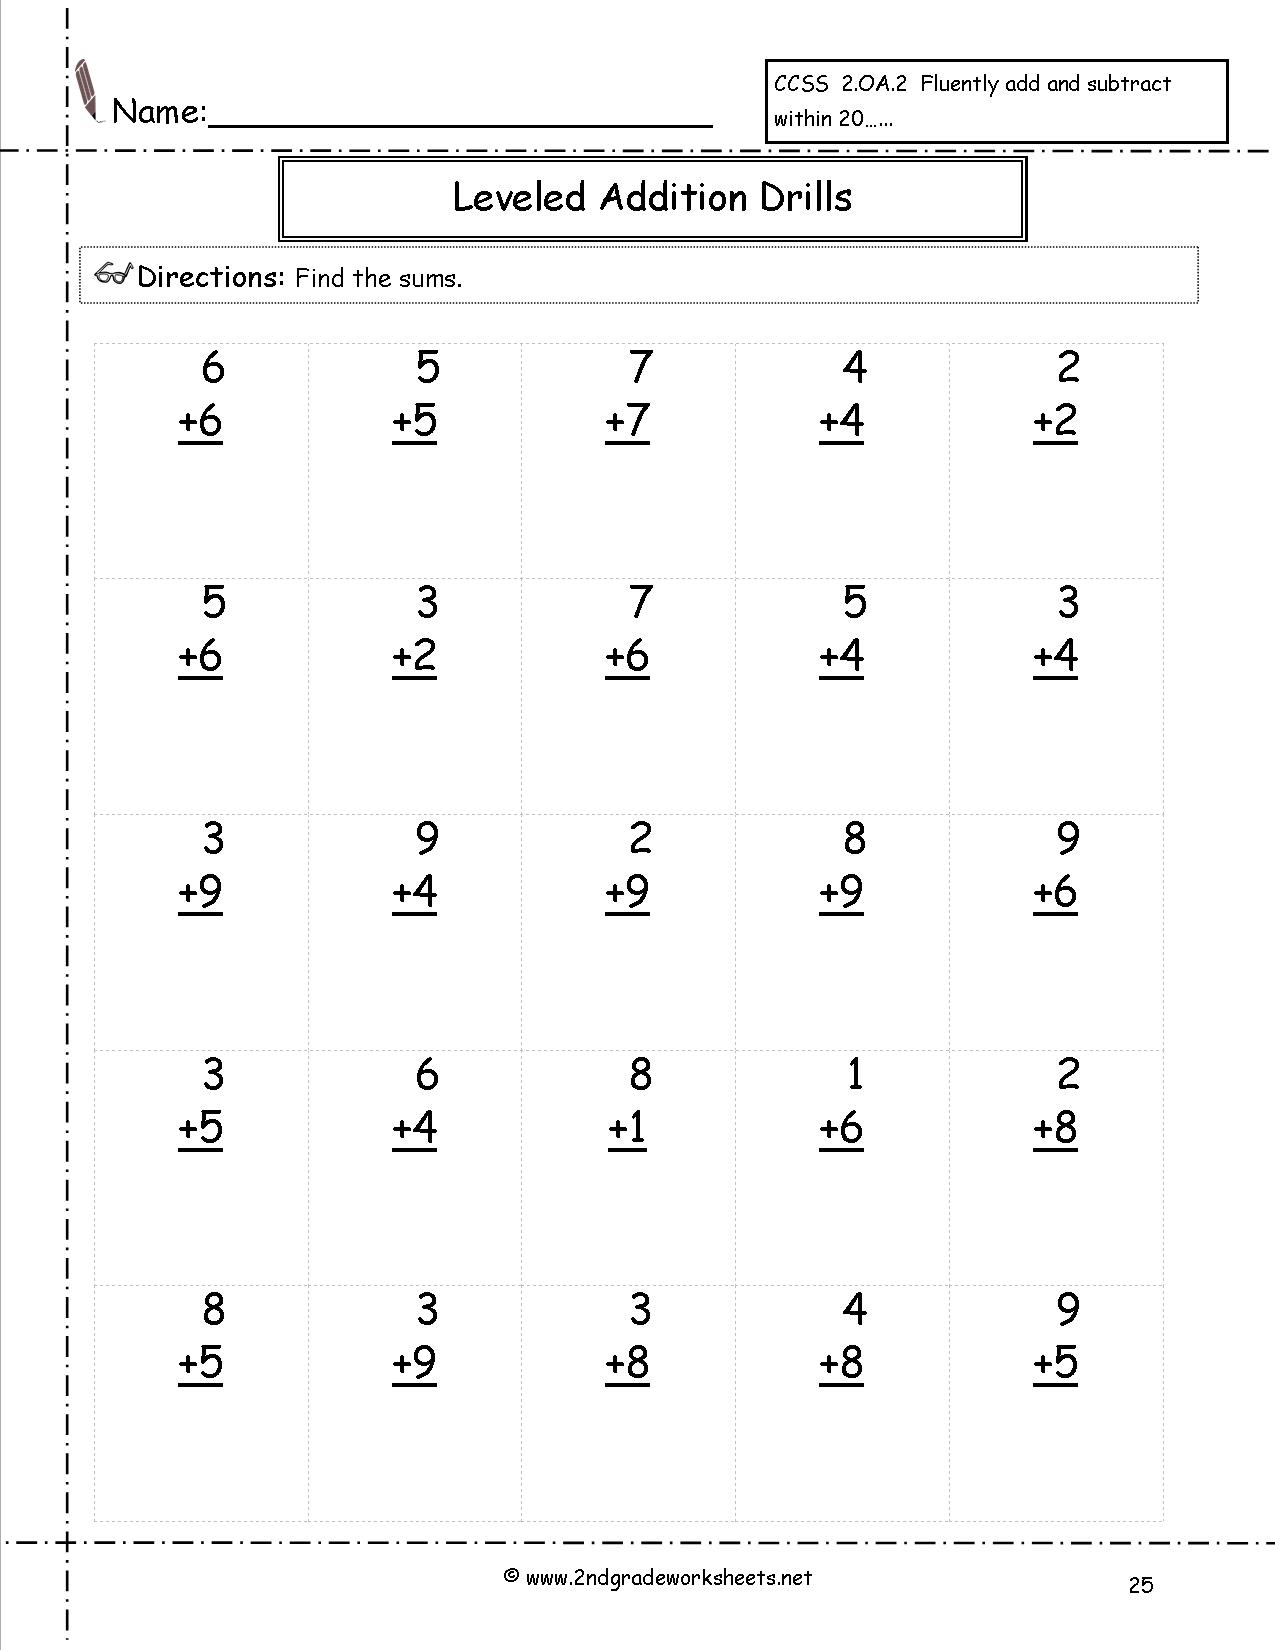 Free Math Worksheets And Printouts - Free Printable Addition Worksheets